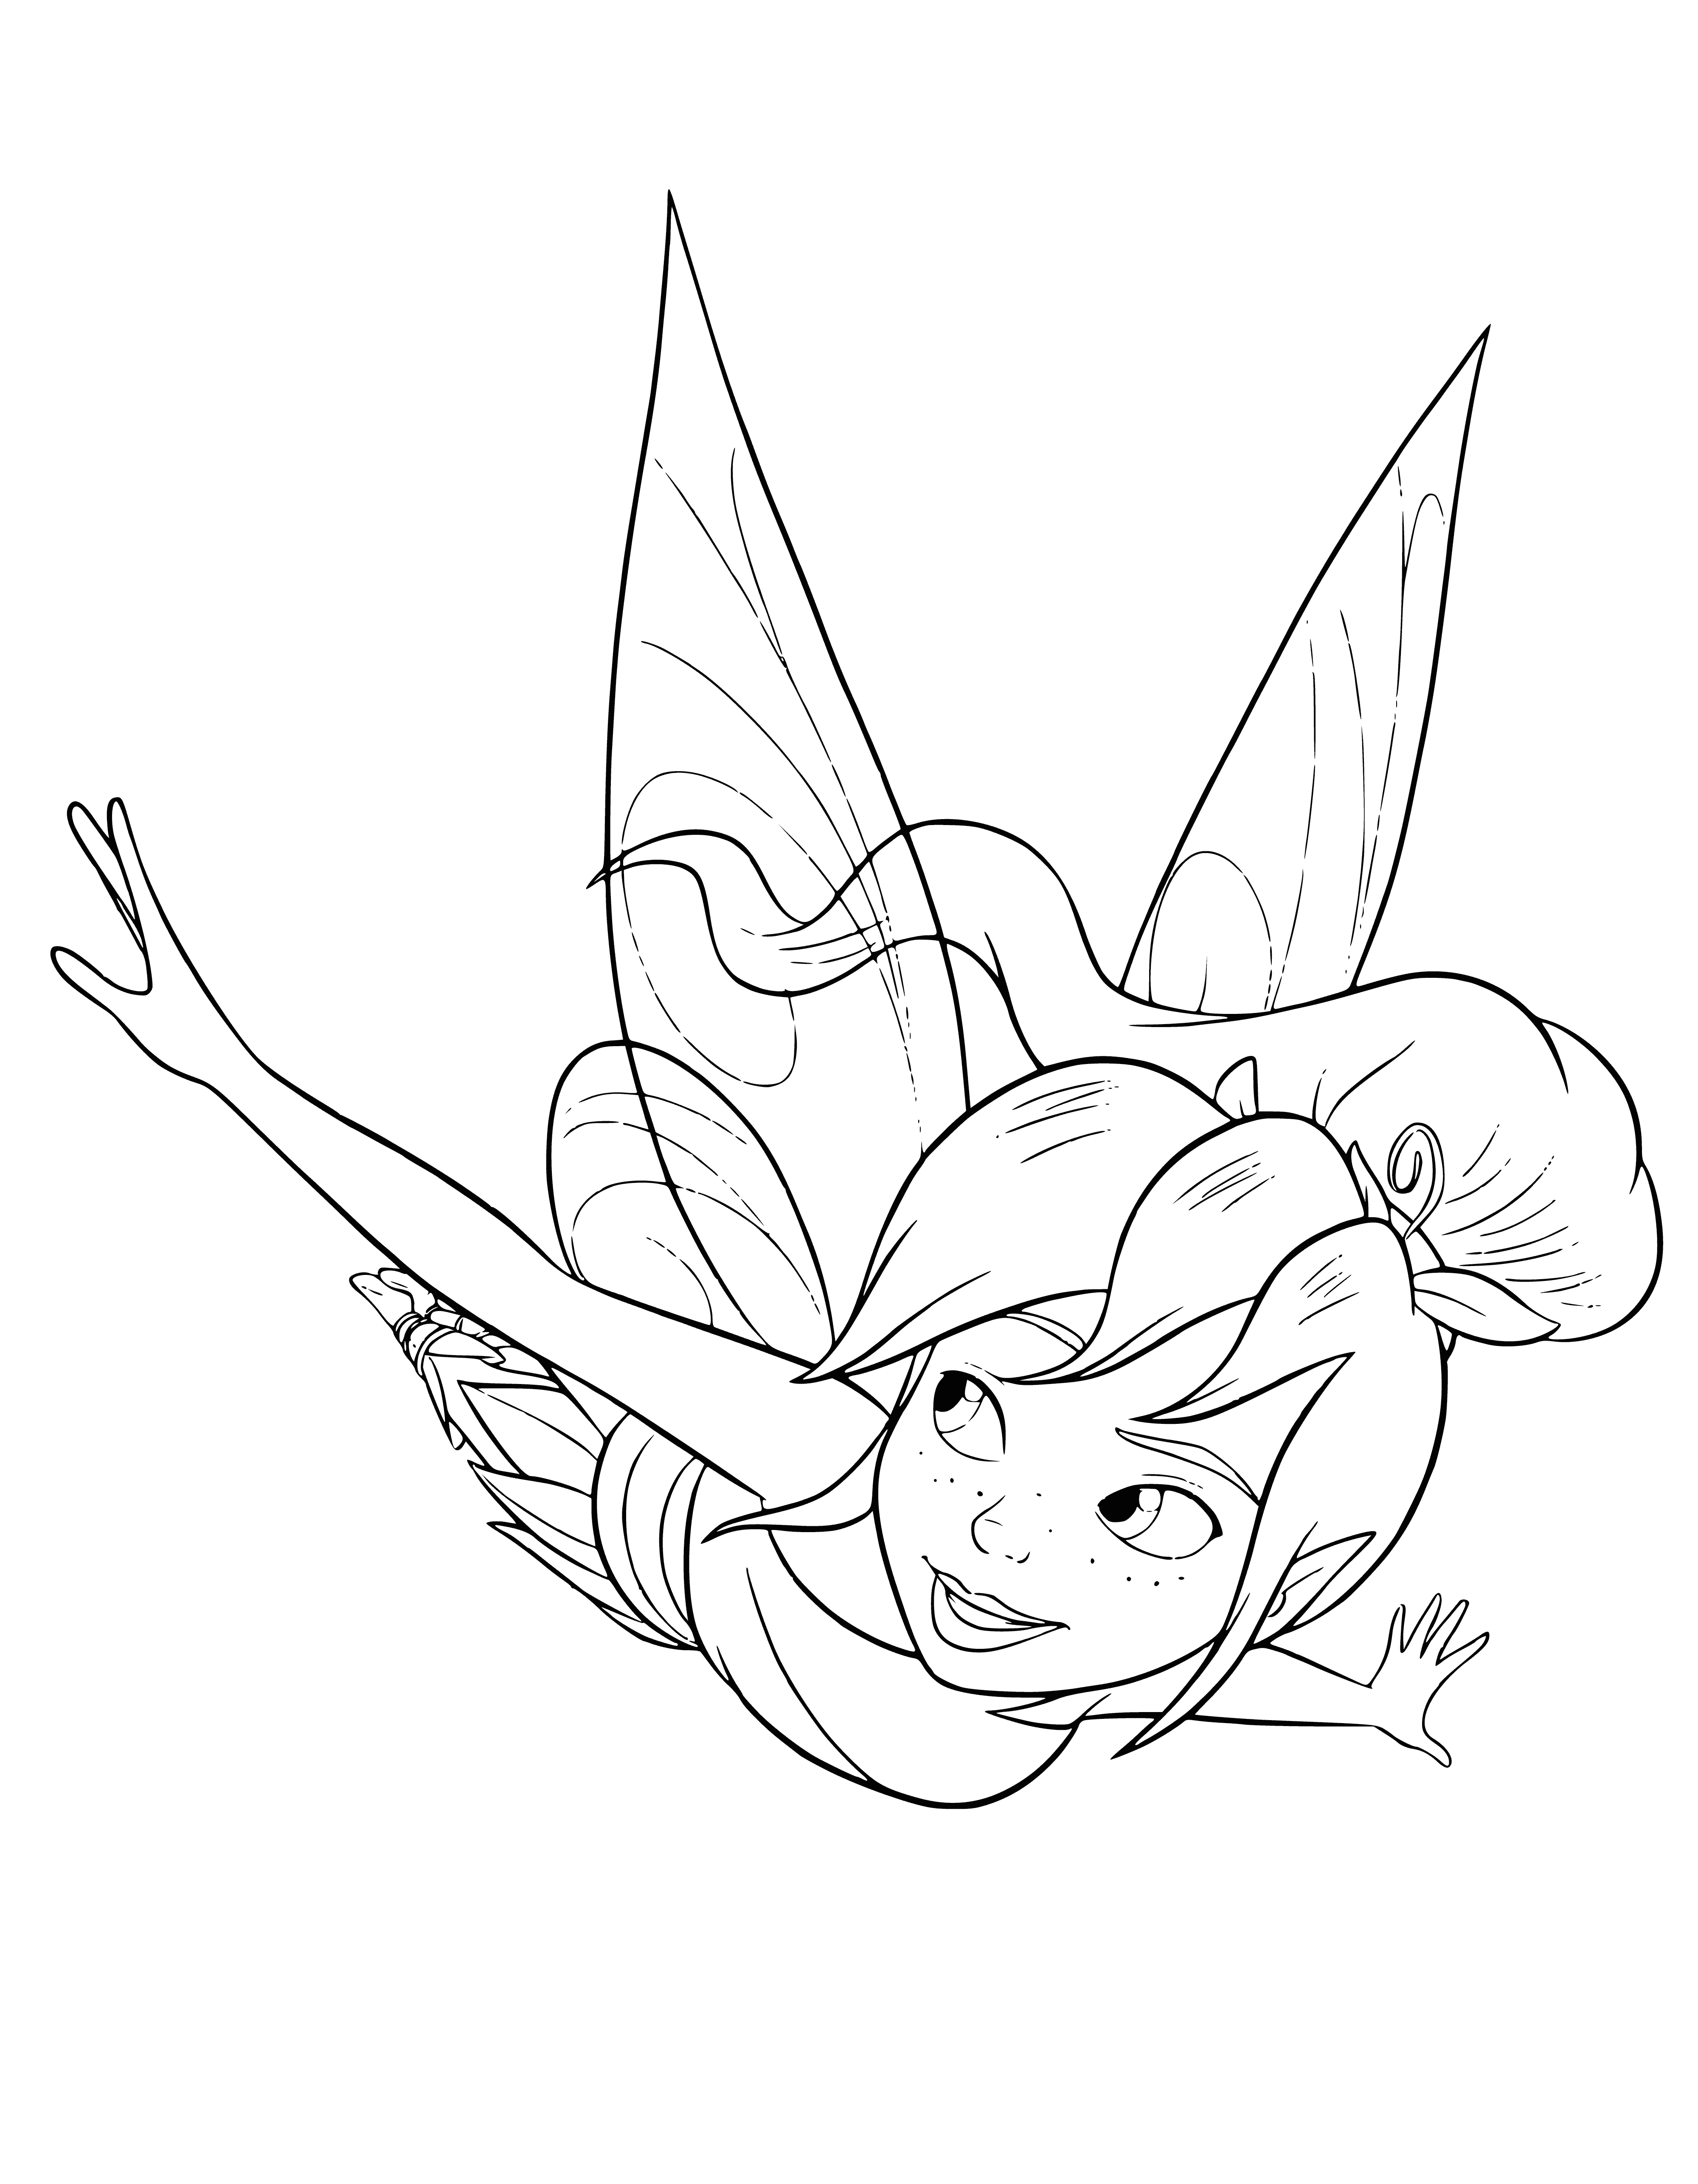 coloring page: Creature soars through the air followed by bright, smaller creatures.